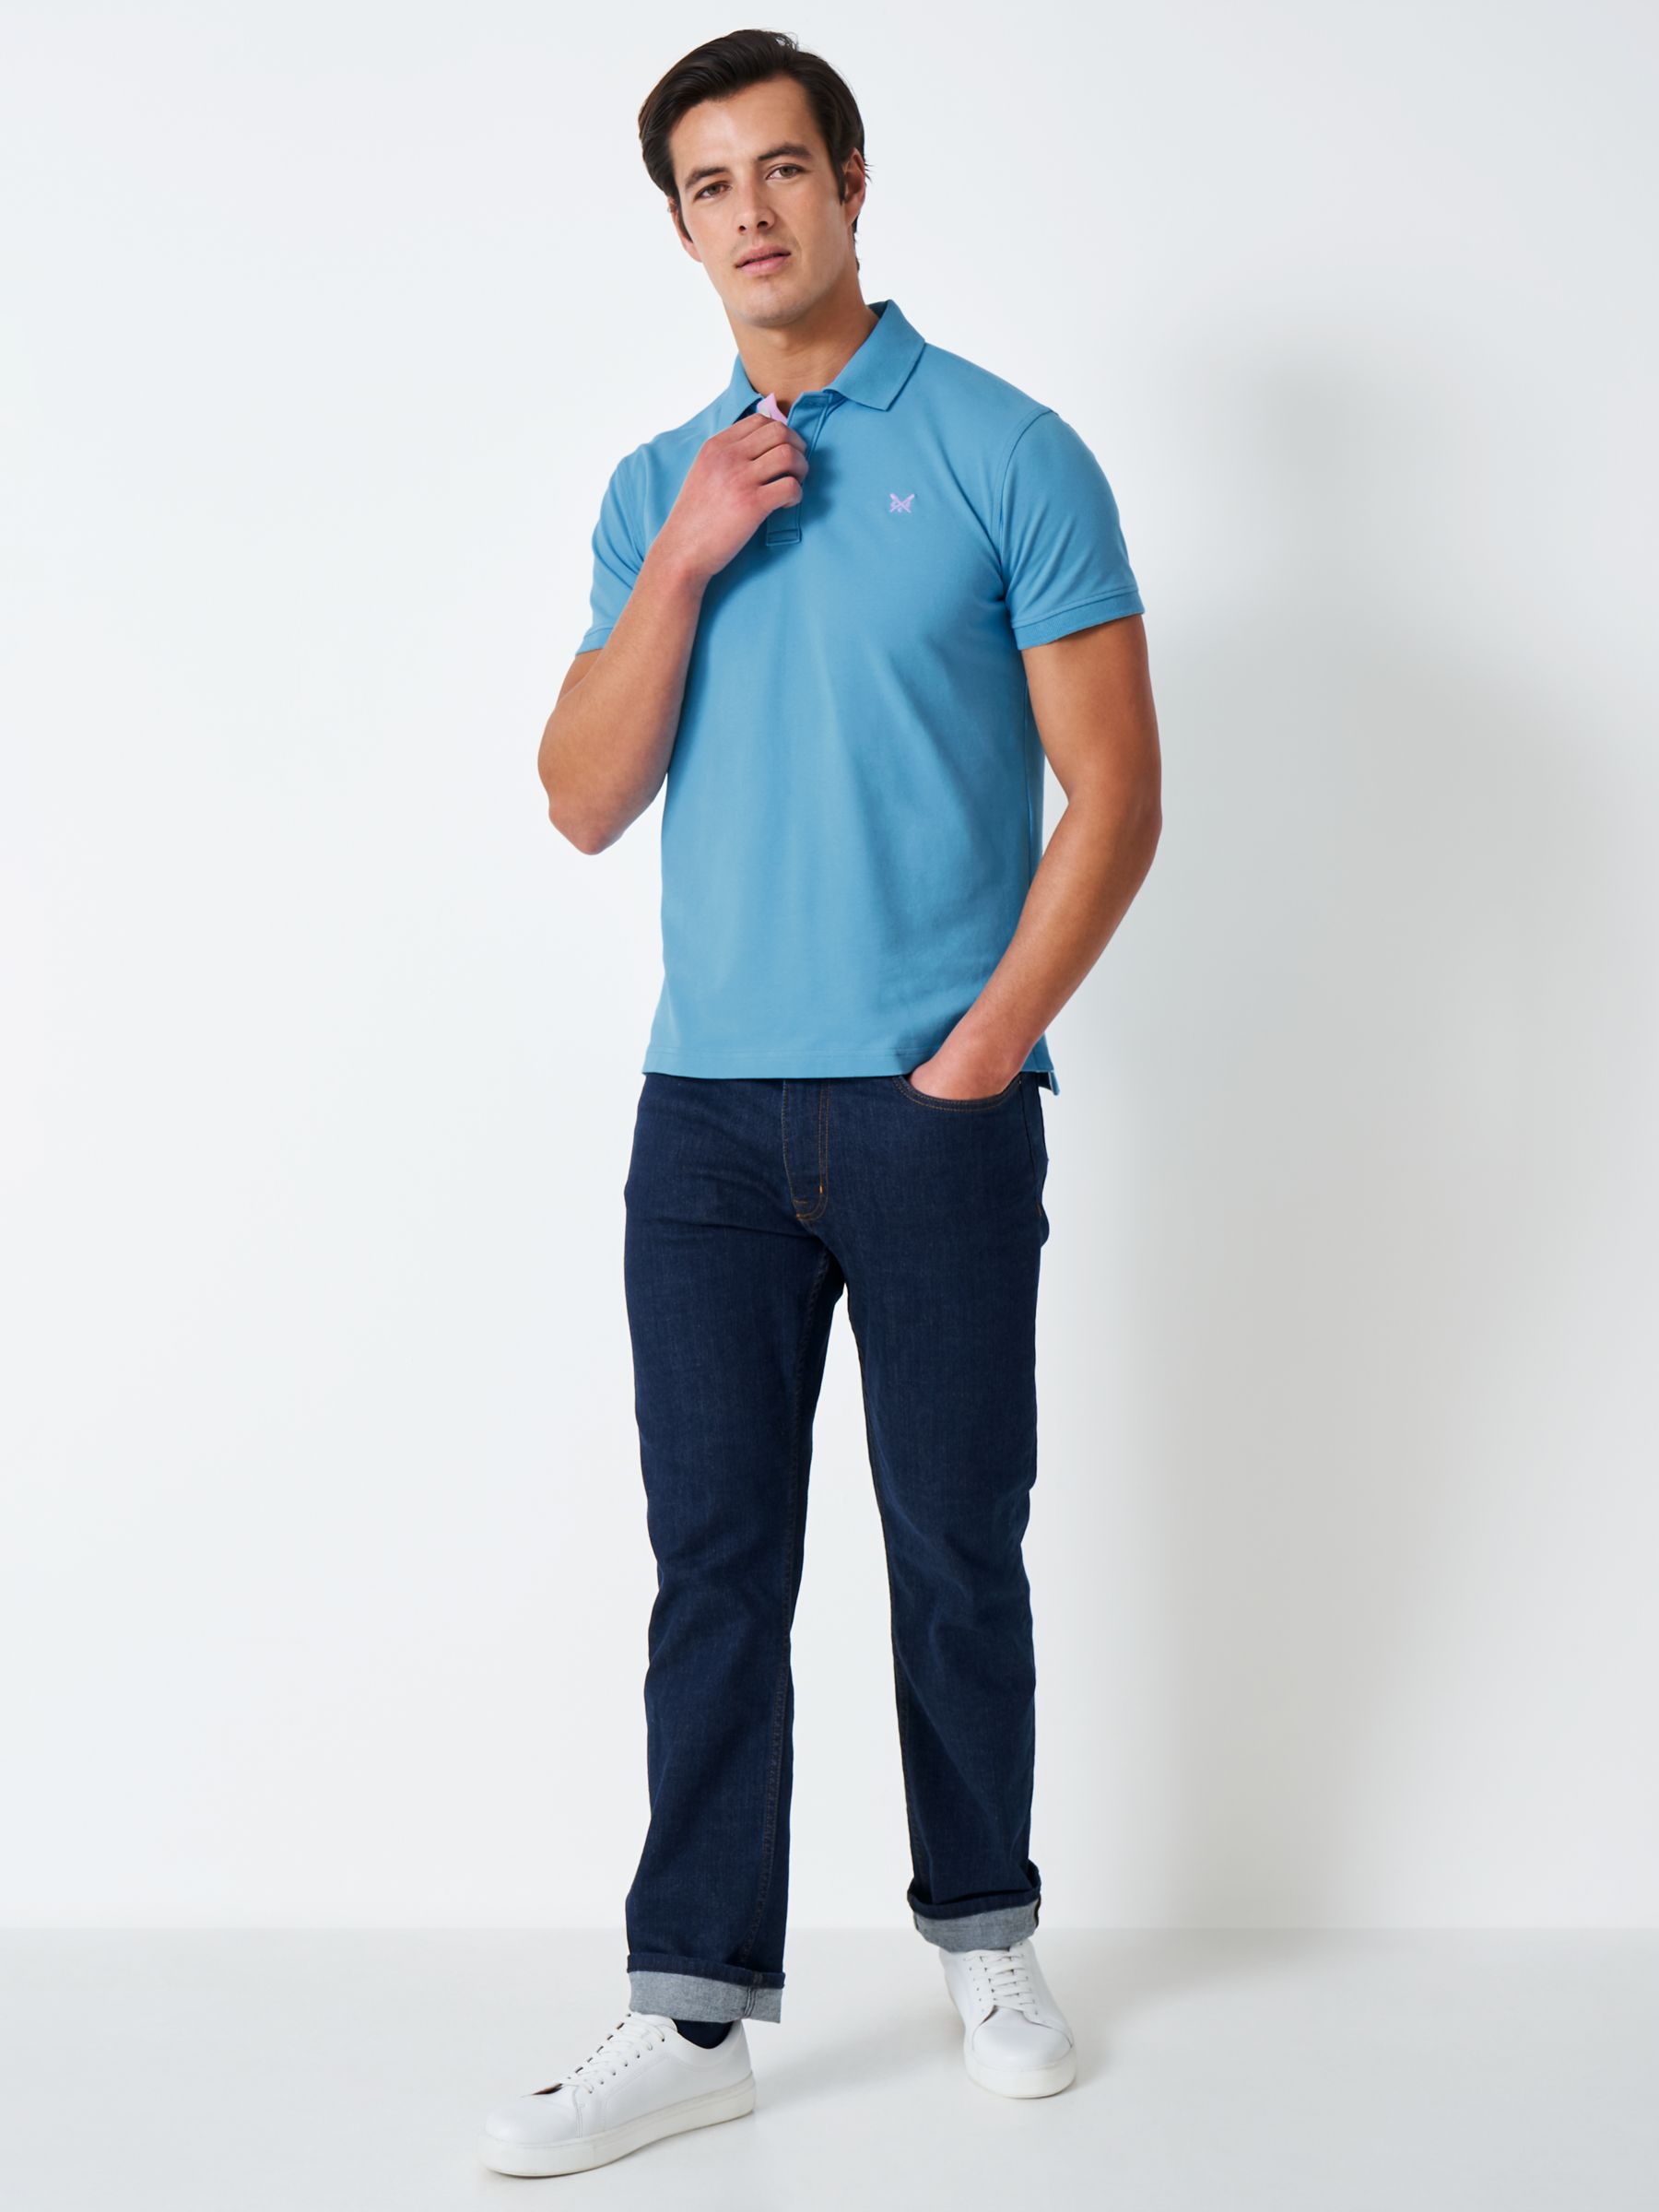 Short Crew Partners Clothing & Lewis at Blue Top, Bright Piqué John Sleeve Polo